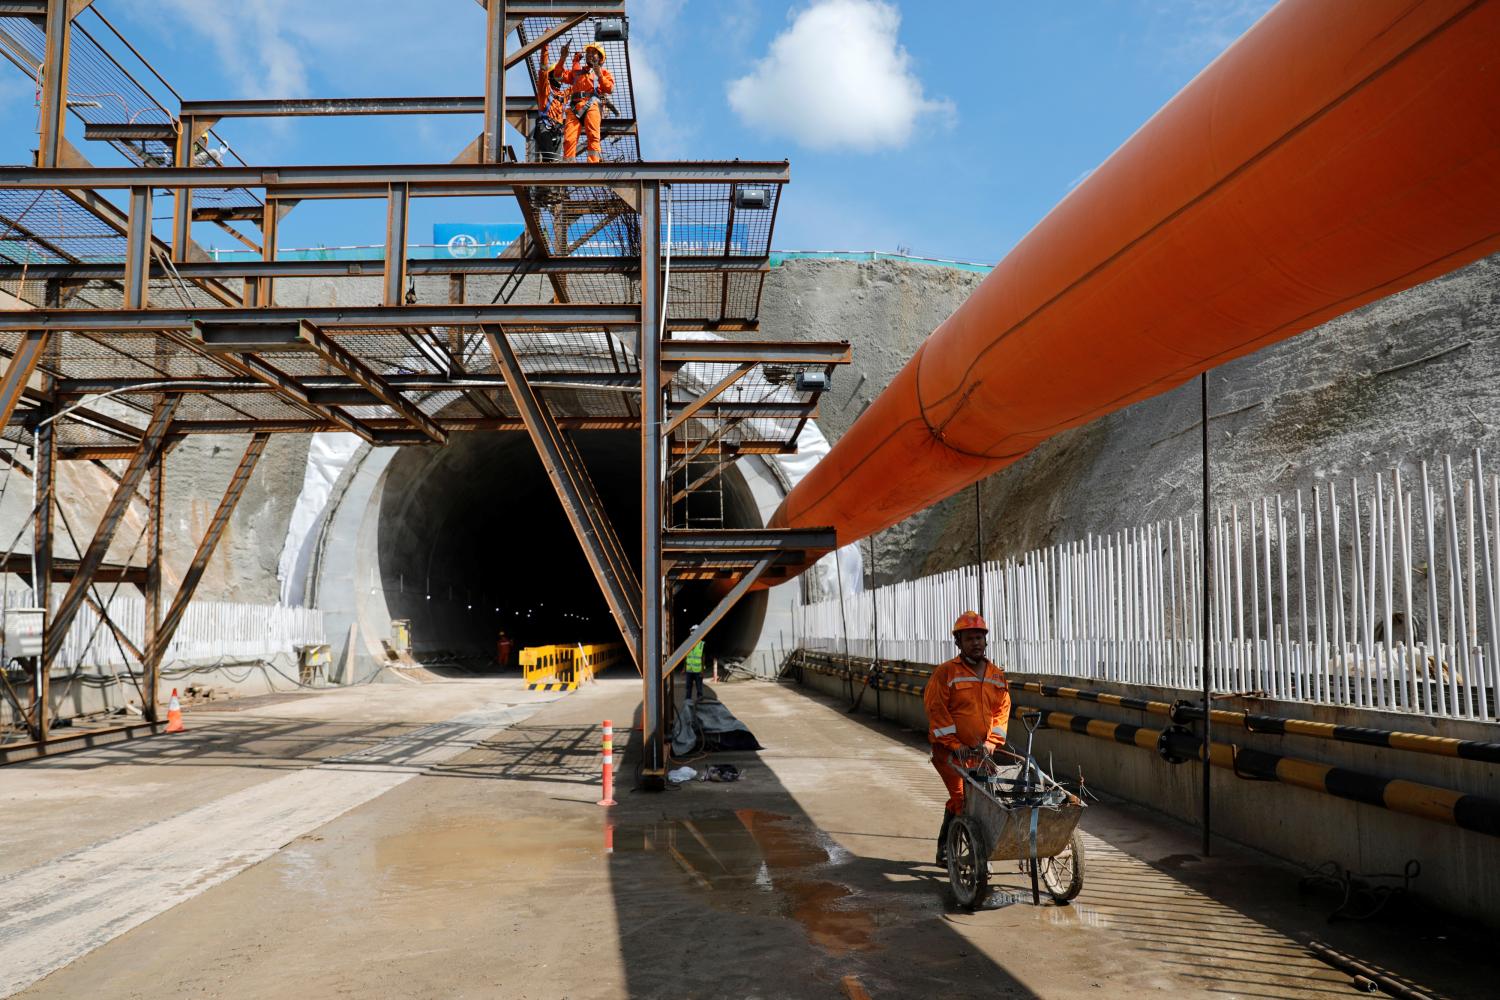 A worker pushes a wheelbarrow at Walini tunnel construction site for Jakarta-Bandung High Speed Railway in West Bandung regency, West Java province, Indonesia, February 21, 2019. Picture taken February 21, 2019. REUTERS/Willy Kurniawan - RC162D22E8C0